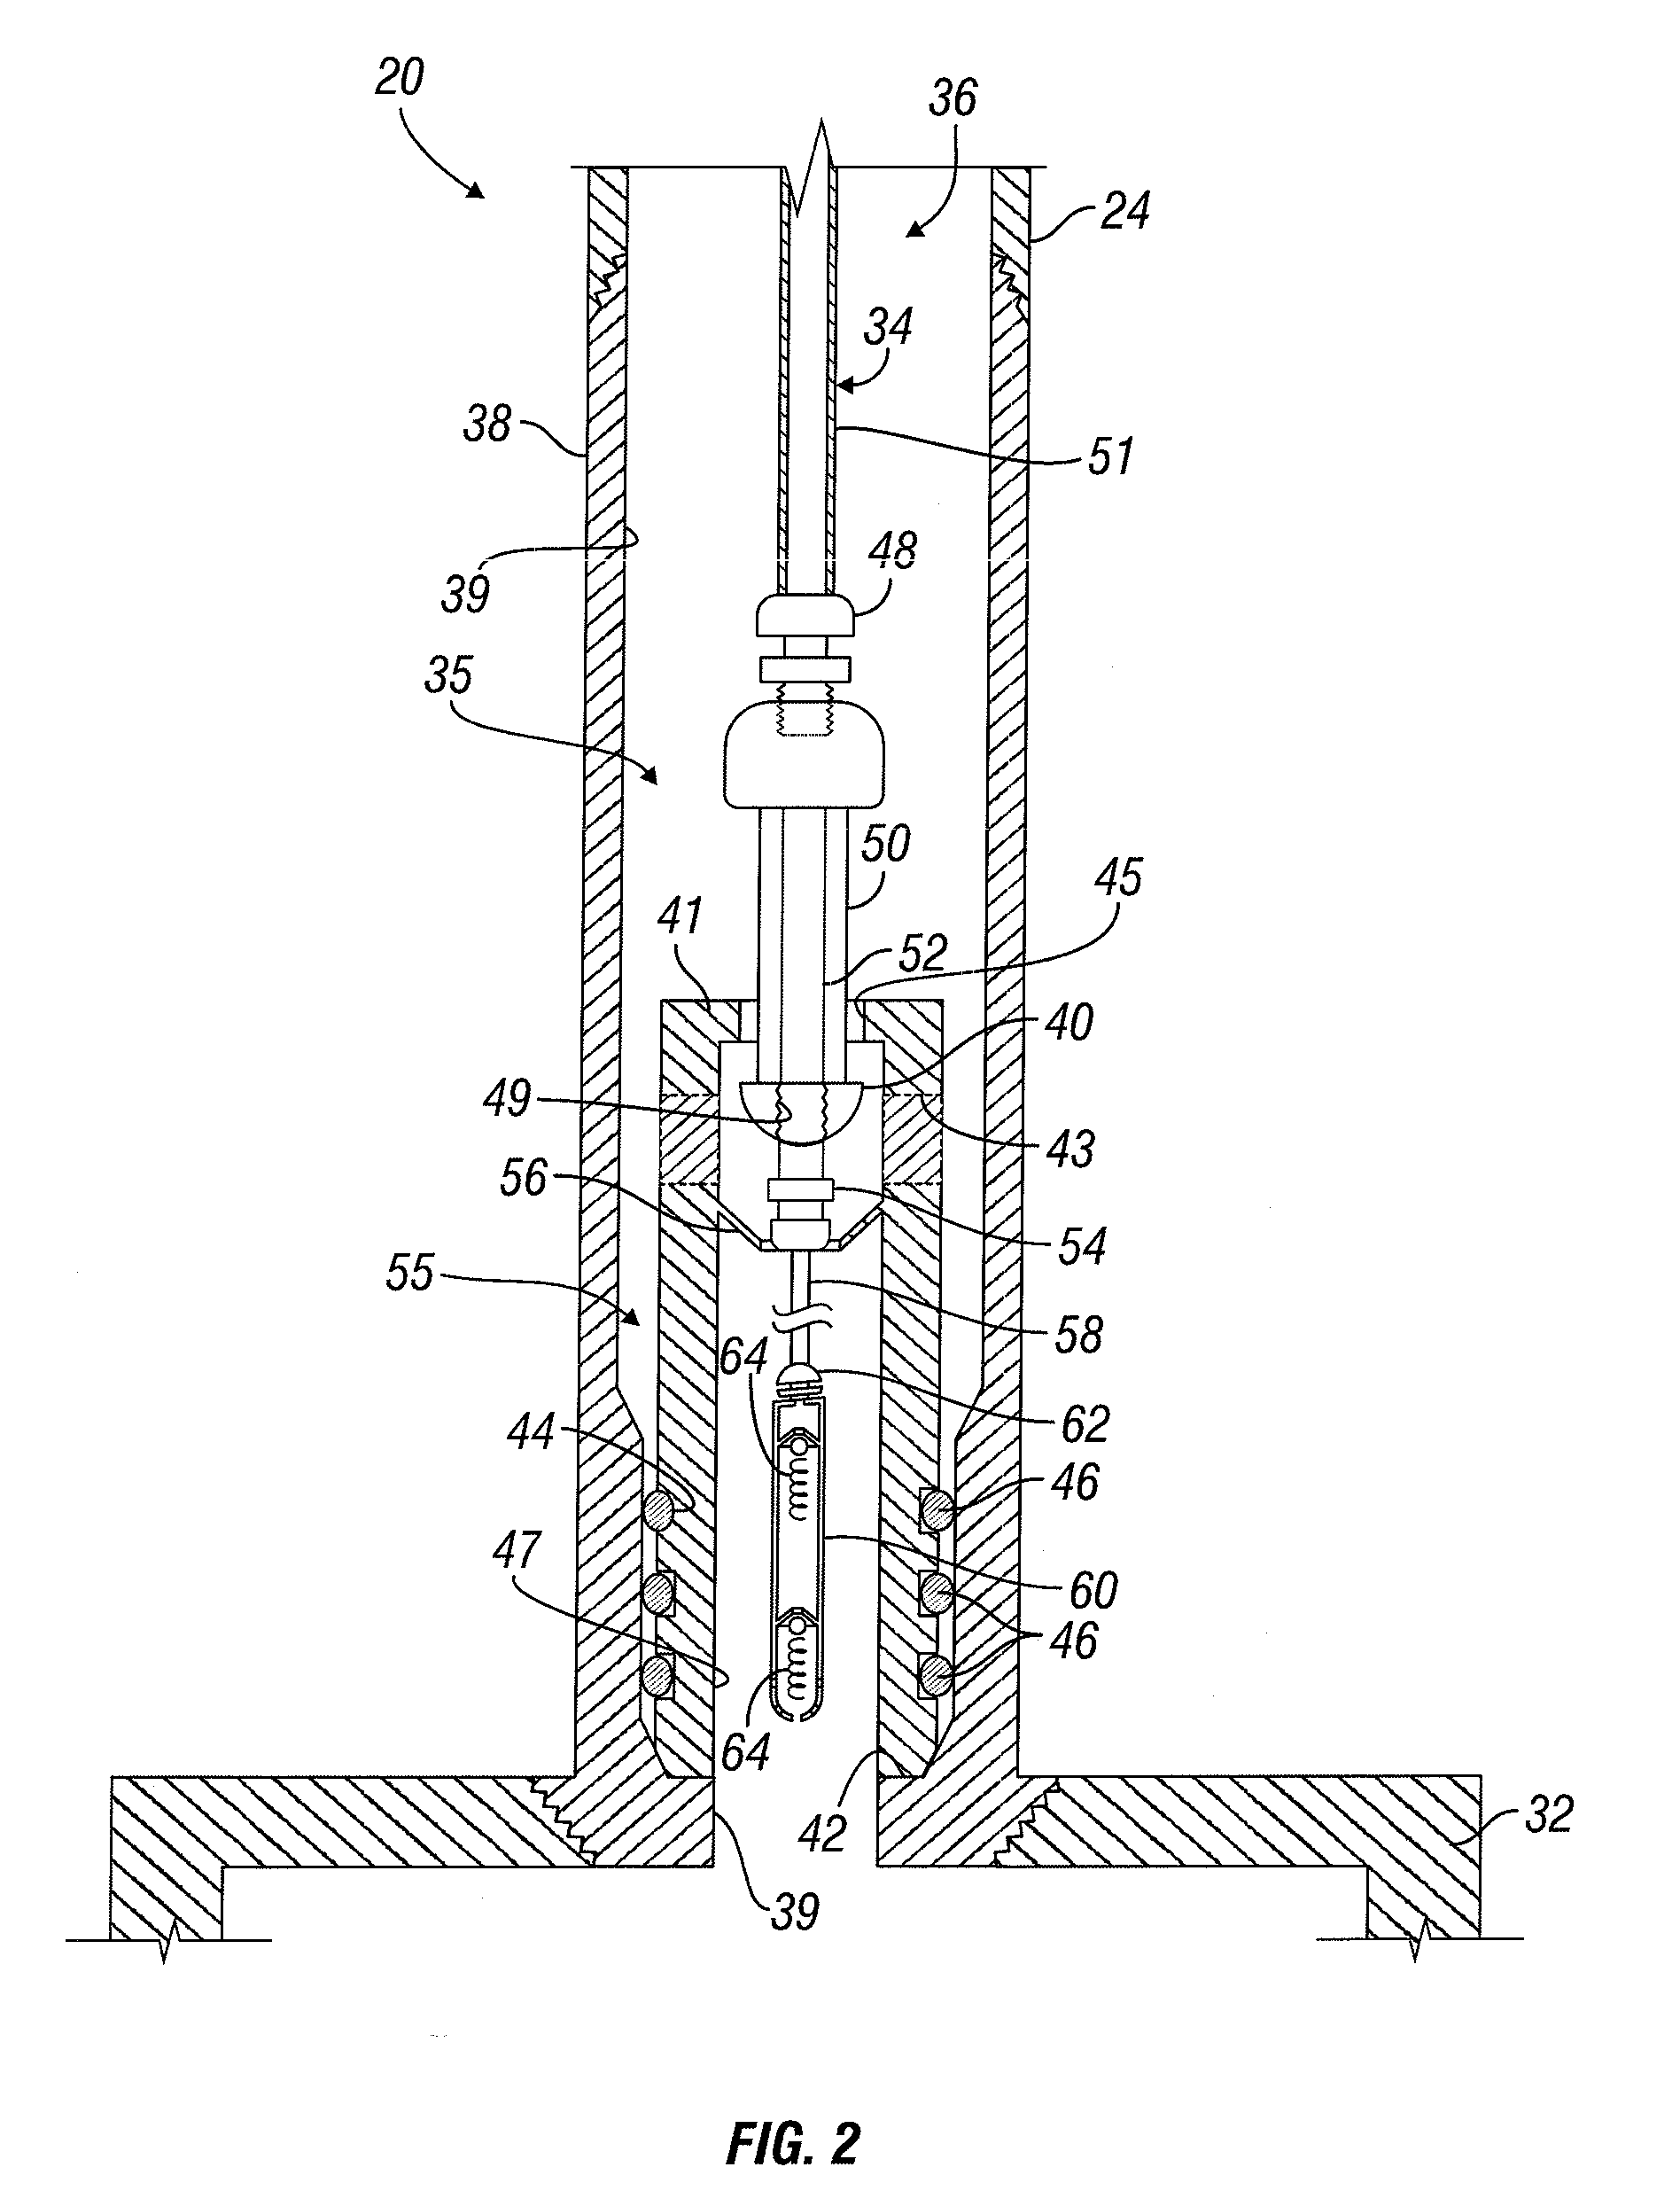 Dead string completion assembly with injection system and methods